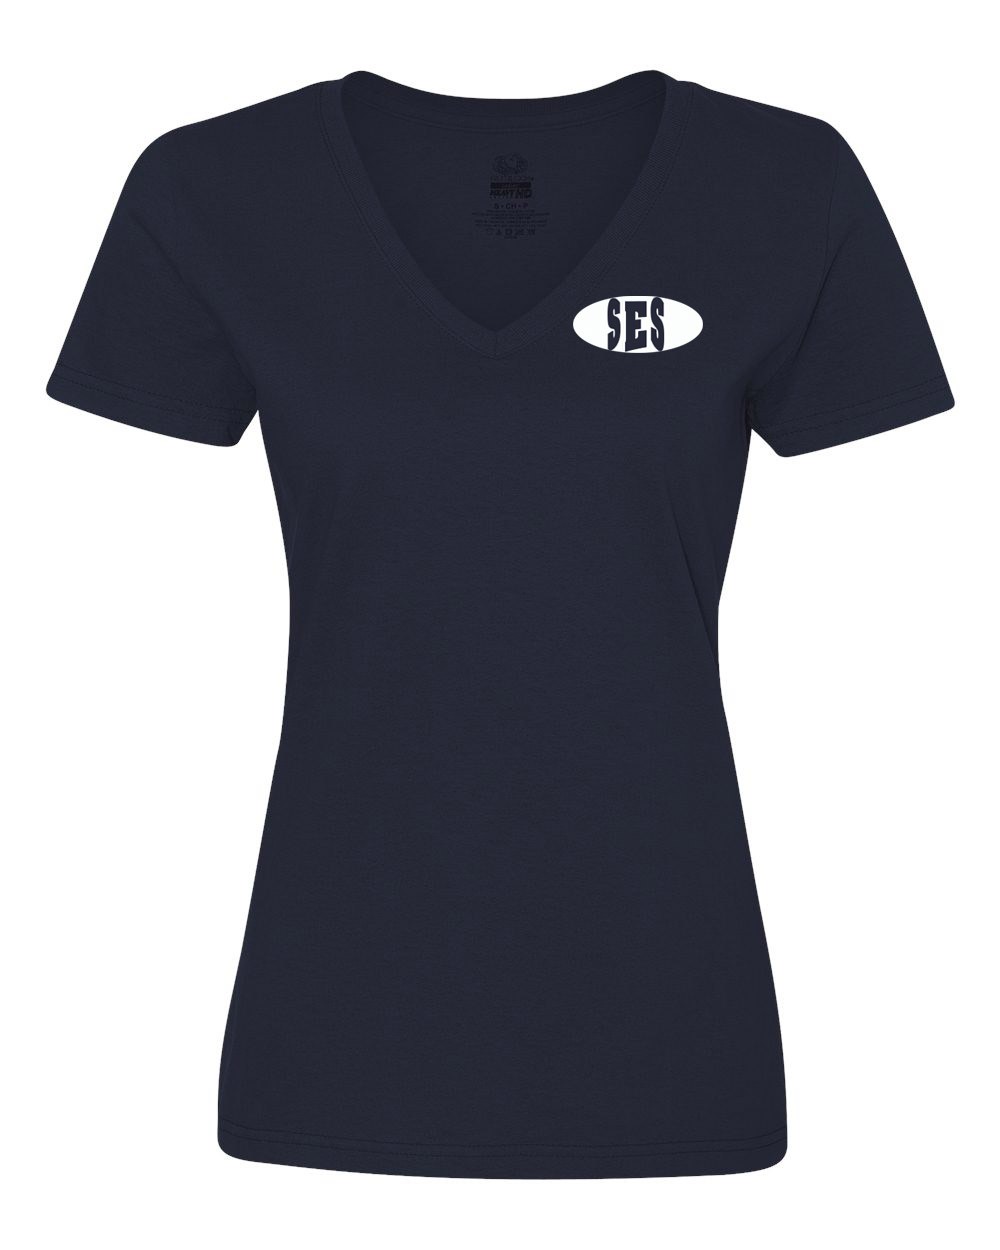 SES Navy Women's Staff V-Neck T-shirt w/ Logo - Please Allow 2-3 Weeks for Delivery